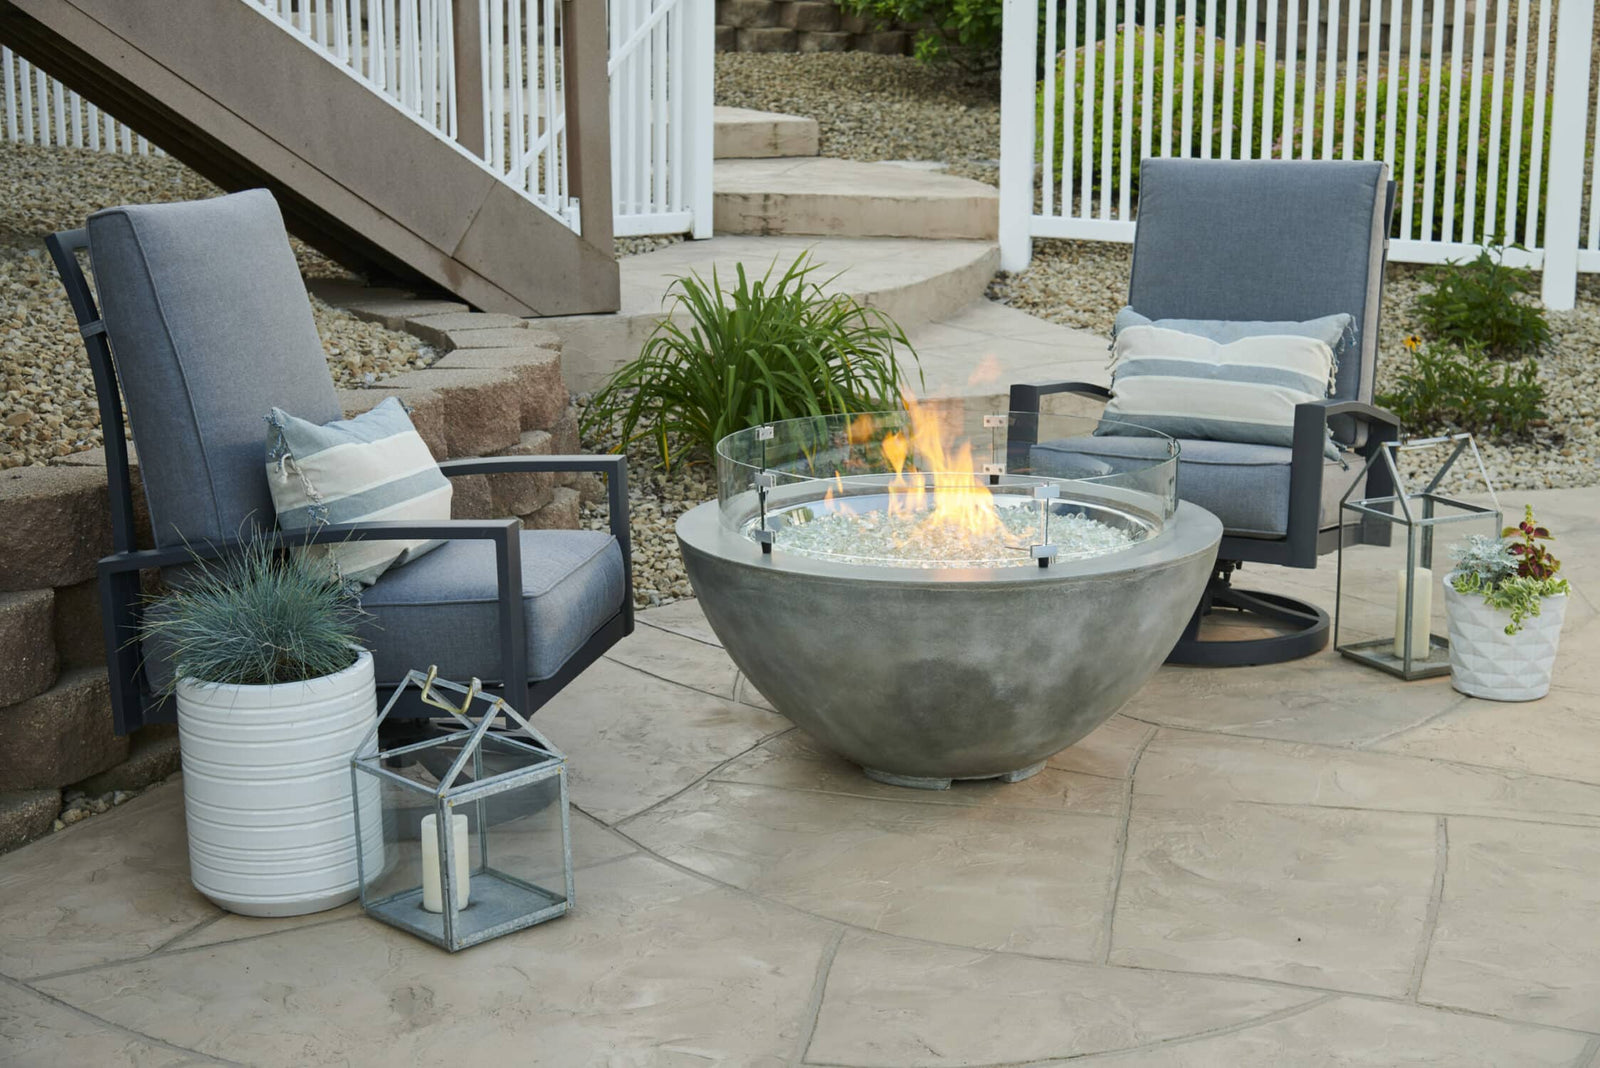 Safety Factors to Consider When Choosing a Fire Pit